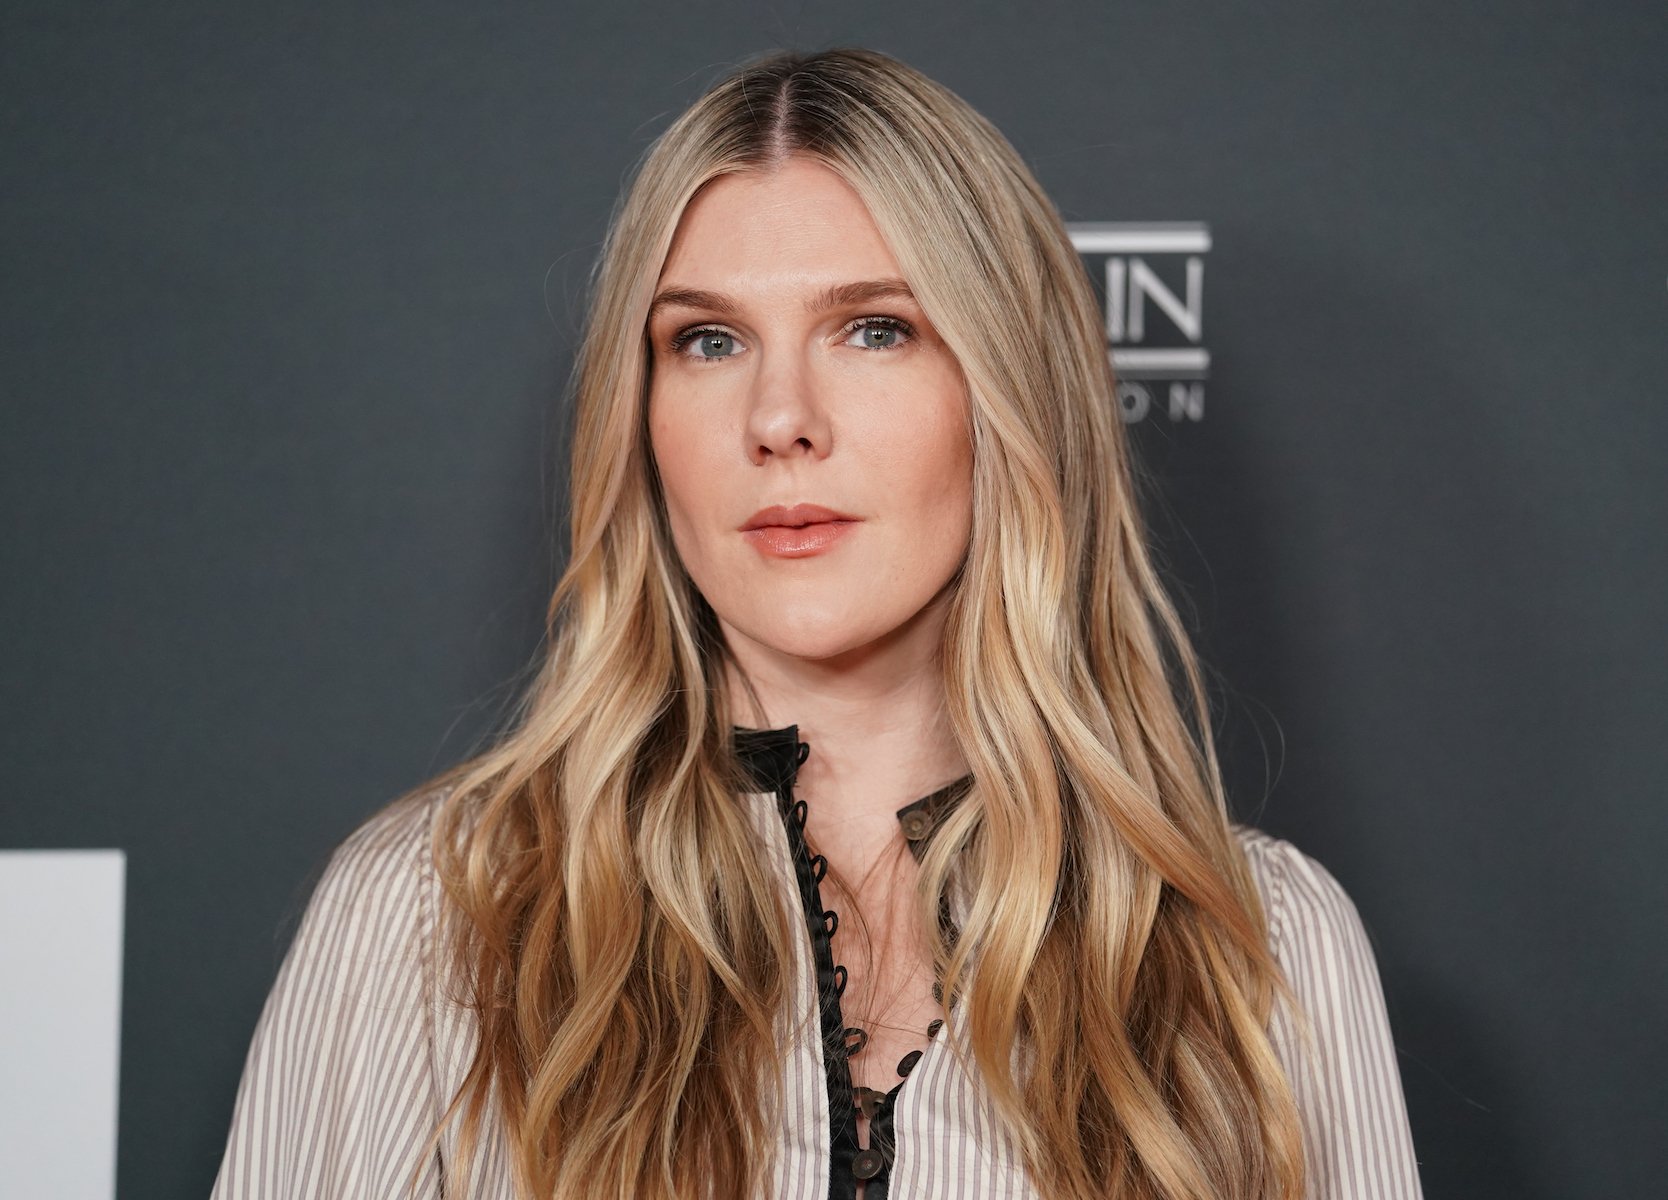 'American Horror Story' Season 10 star Lily Rabe close-up against a black background